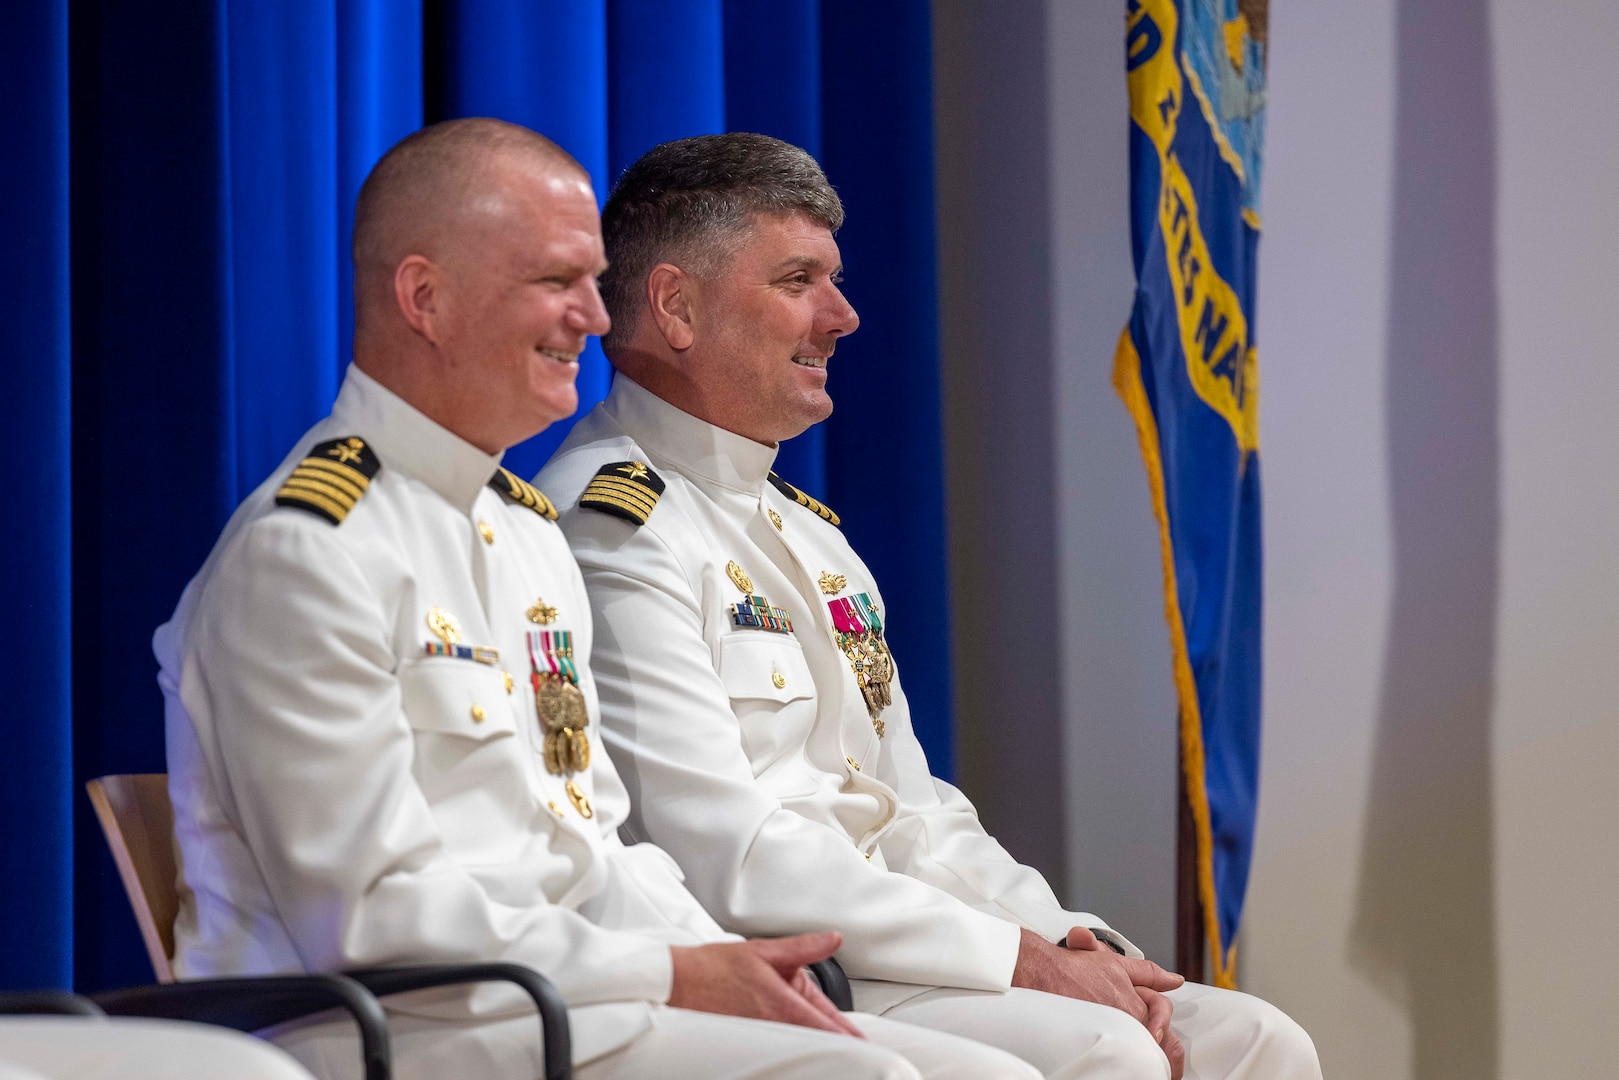 Naval Surface Warfare Center, Carderock Division holds a change of command on May 12, 2023, in Bethesda, Md., where Capt. Matthew Tardy relieved Capt. Todd E. Hutchison as commanding officer after three years of service to Carderock. (U.S. Navy photo by Devin Pisner)